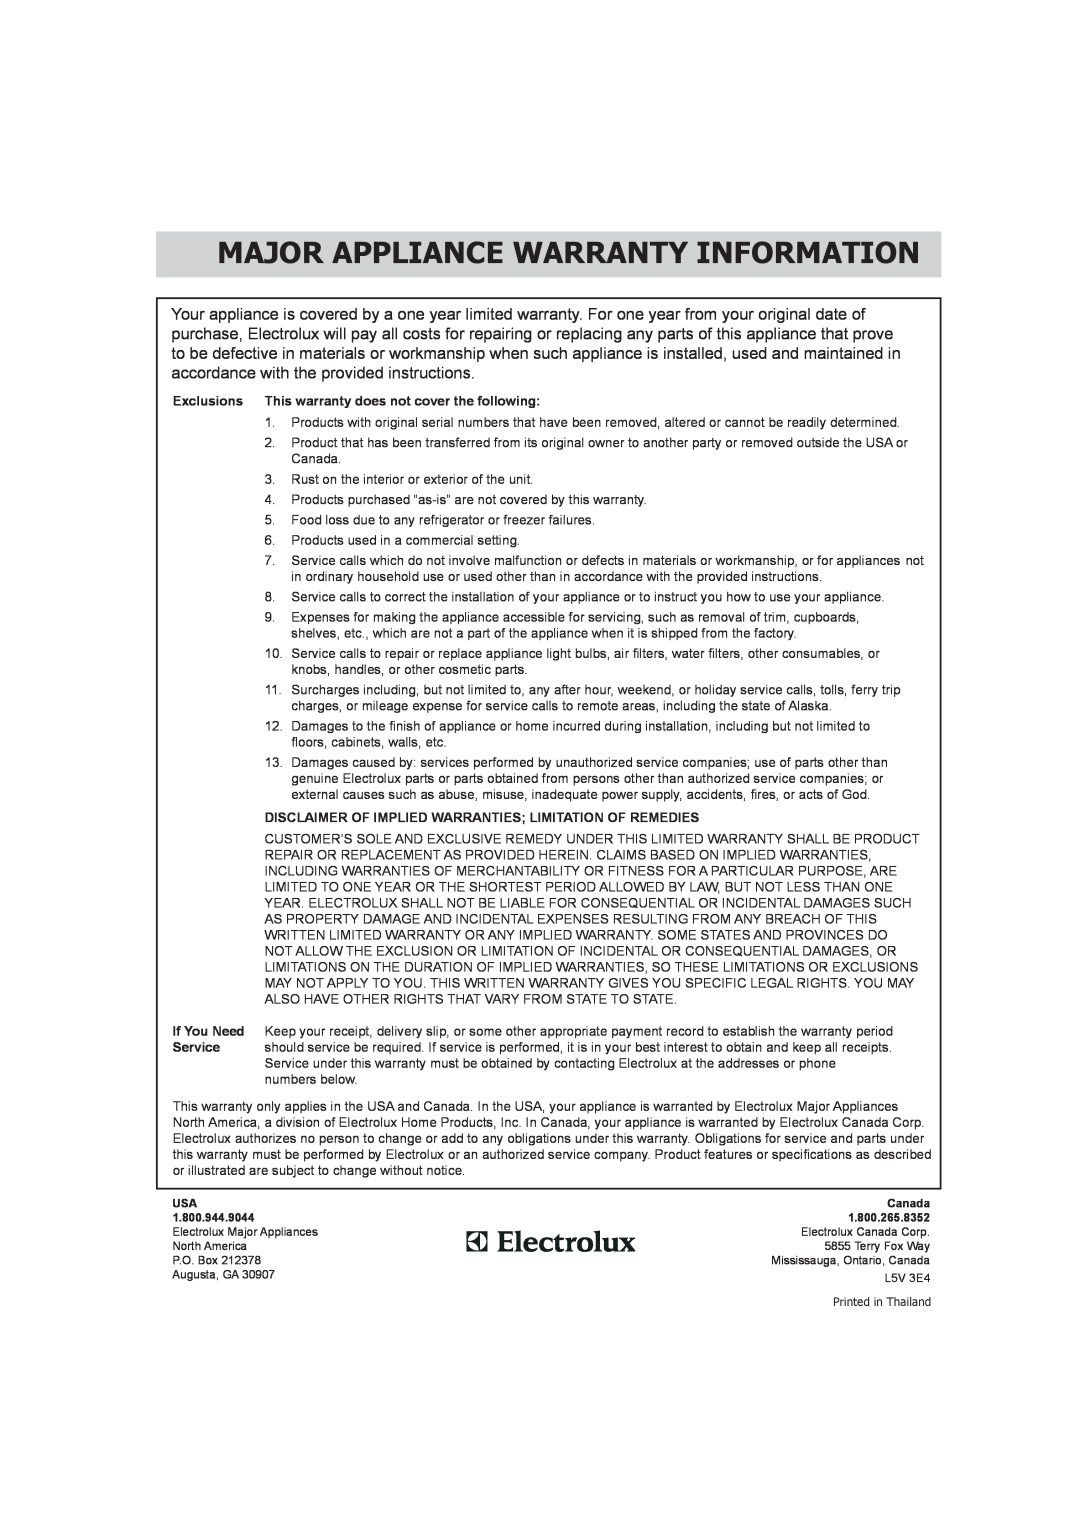 Frigidaire 316495055 Major Appliance Warranty Information, Exclusions This warranty does not cover the following 